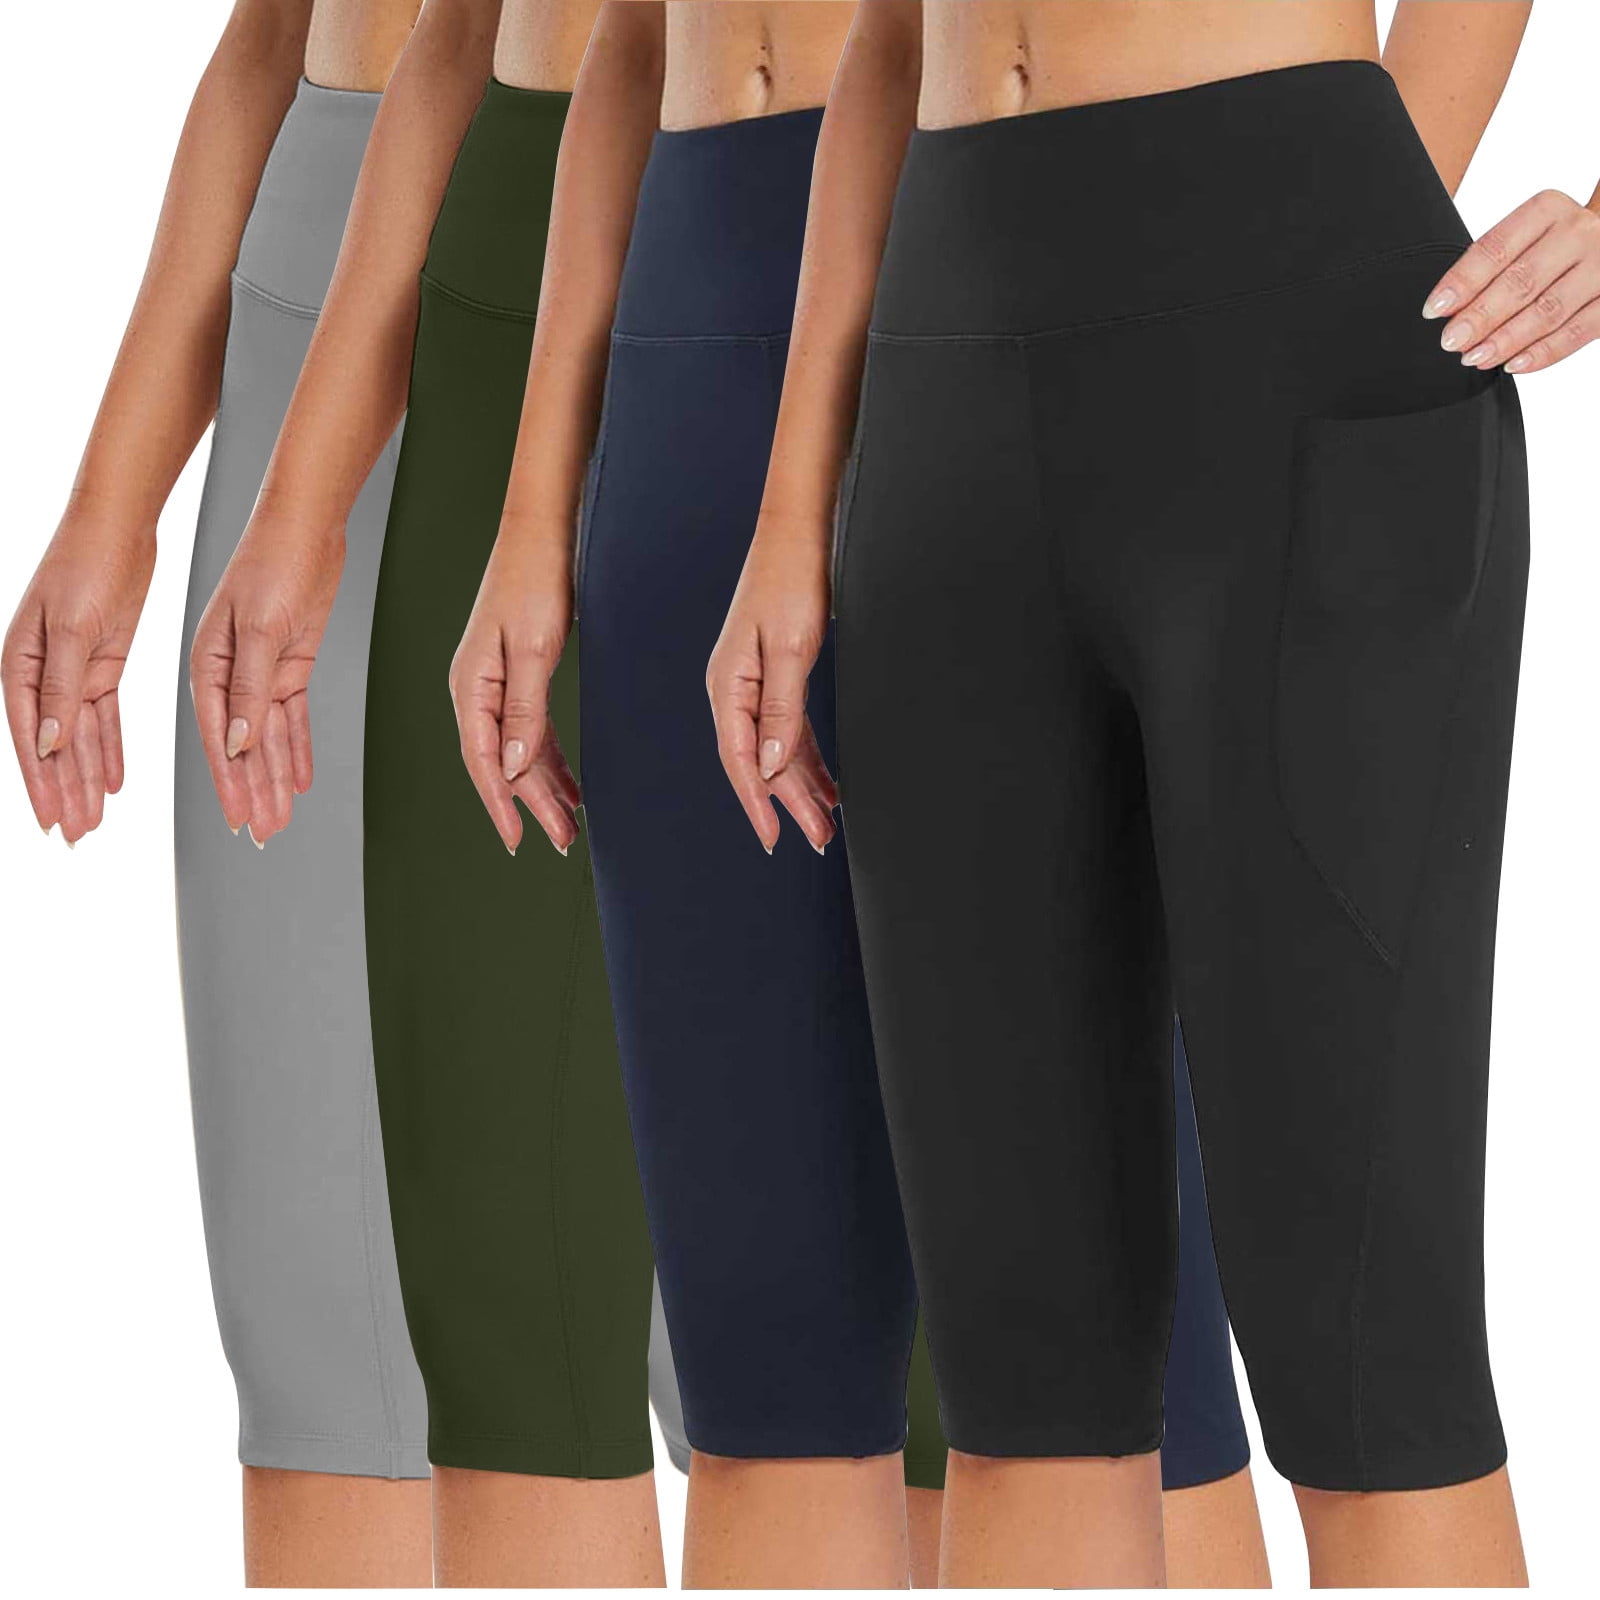 SMihono High Waist High Elasticity Yoga Pants With Pockets, Workout Running  Yoga Leggings For Women Women's Pants Capris Quick Dry Outdoor Athletic